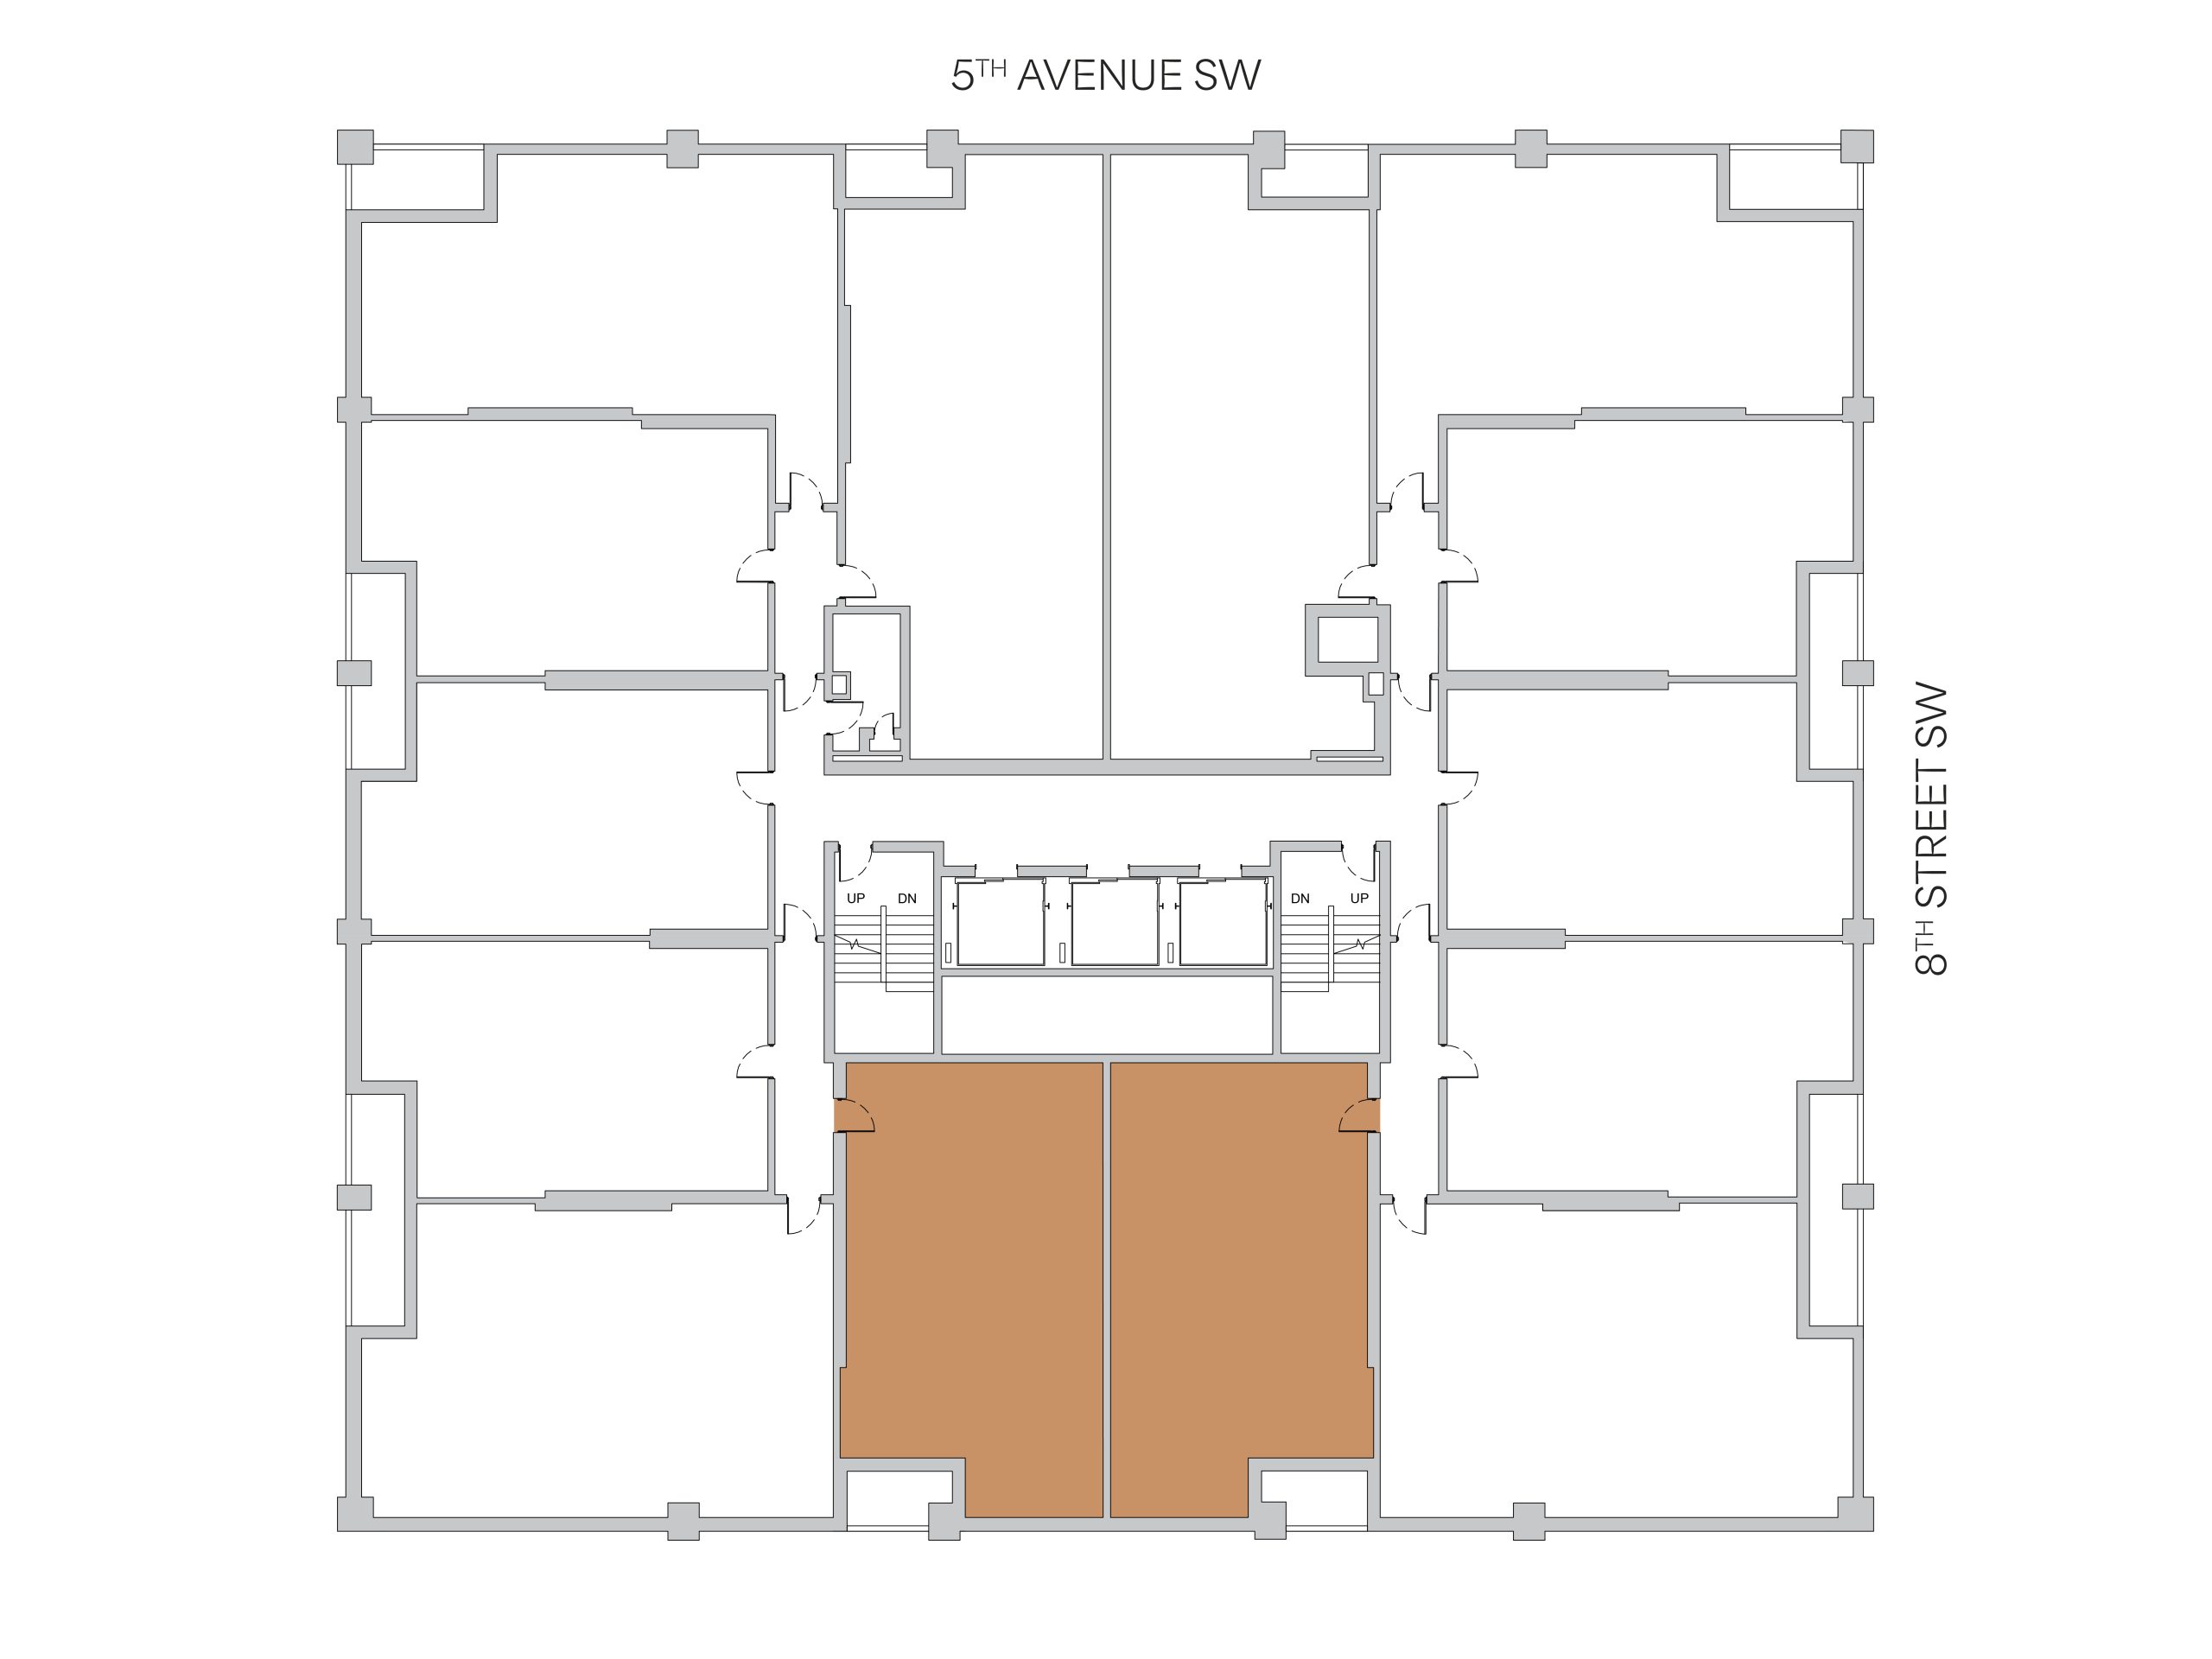 Location of Slate floor plans in The Cornerstone building